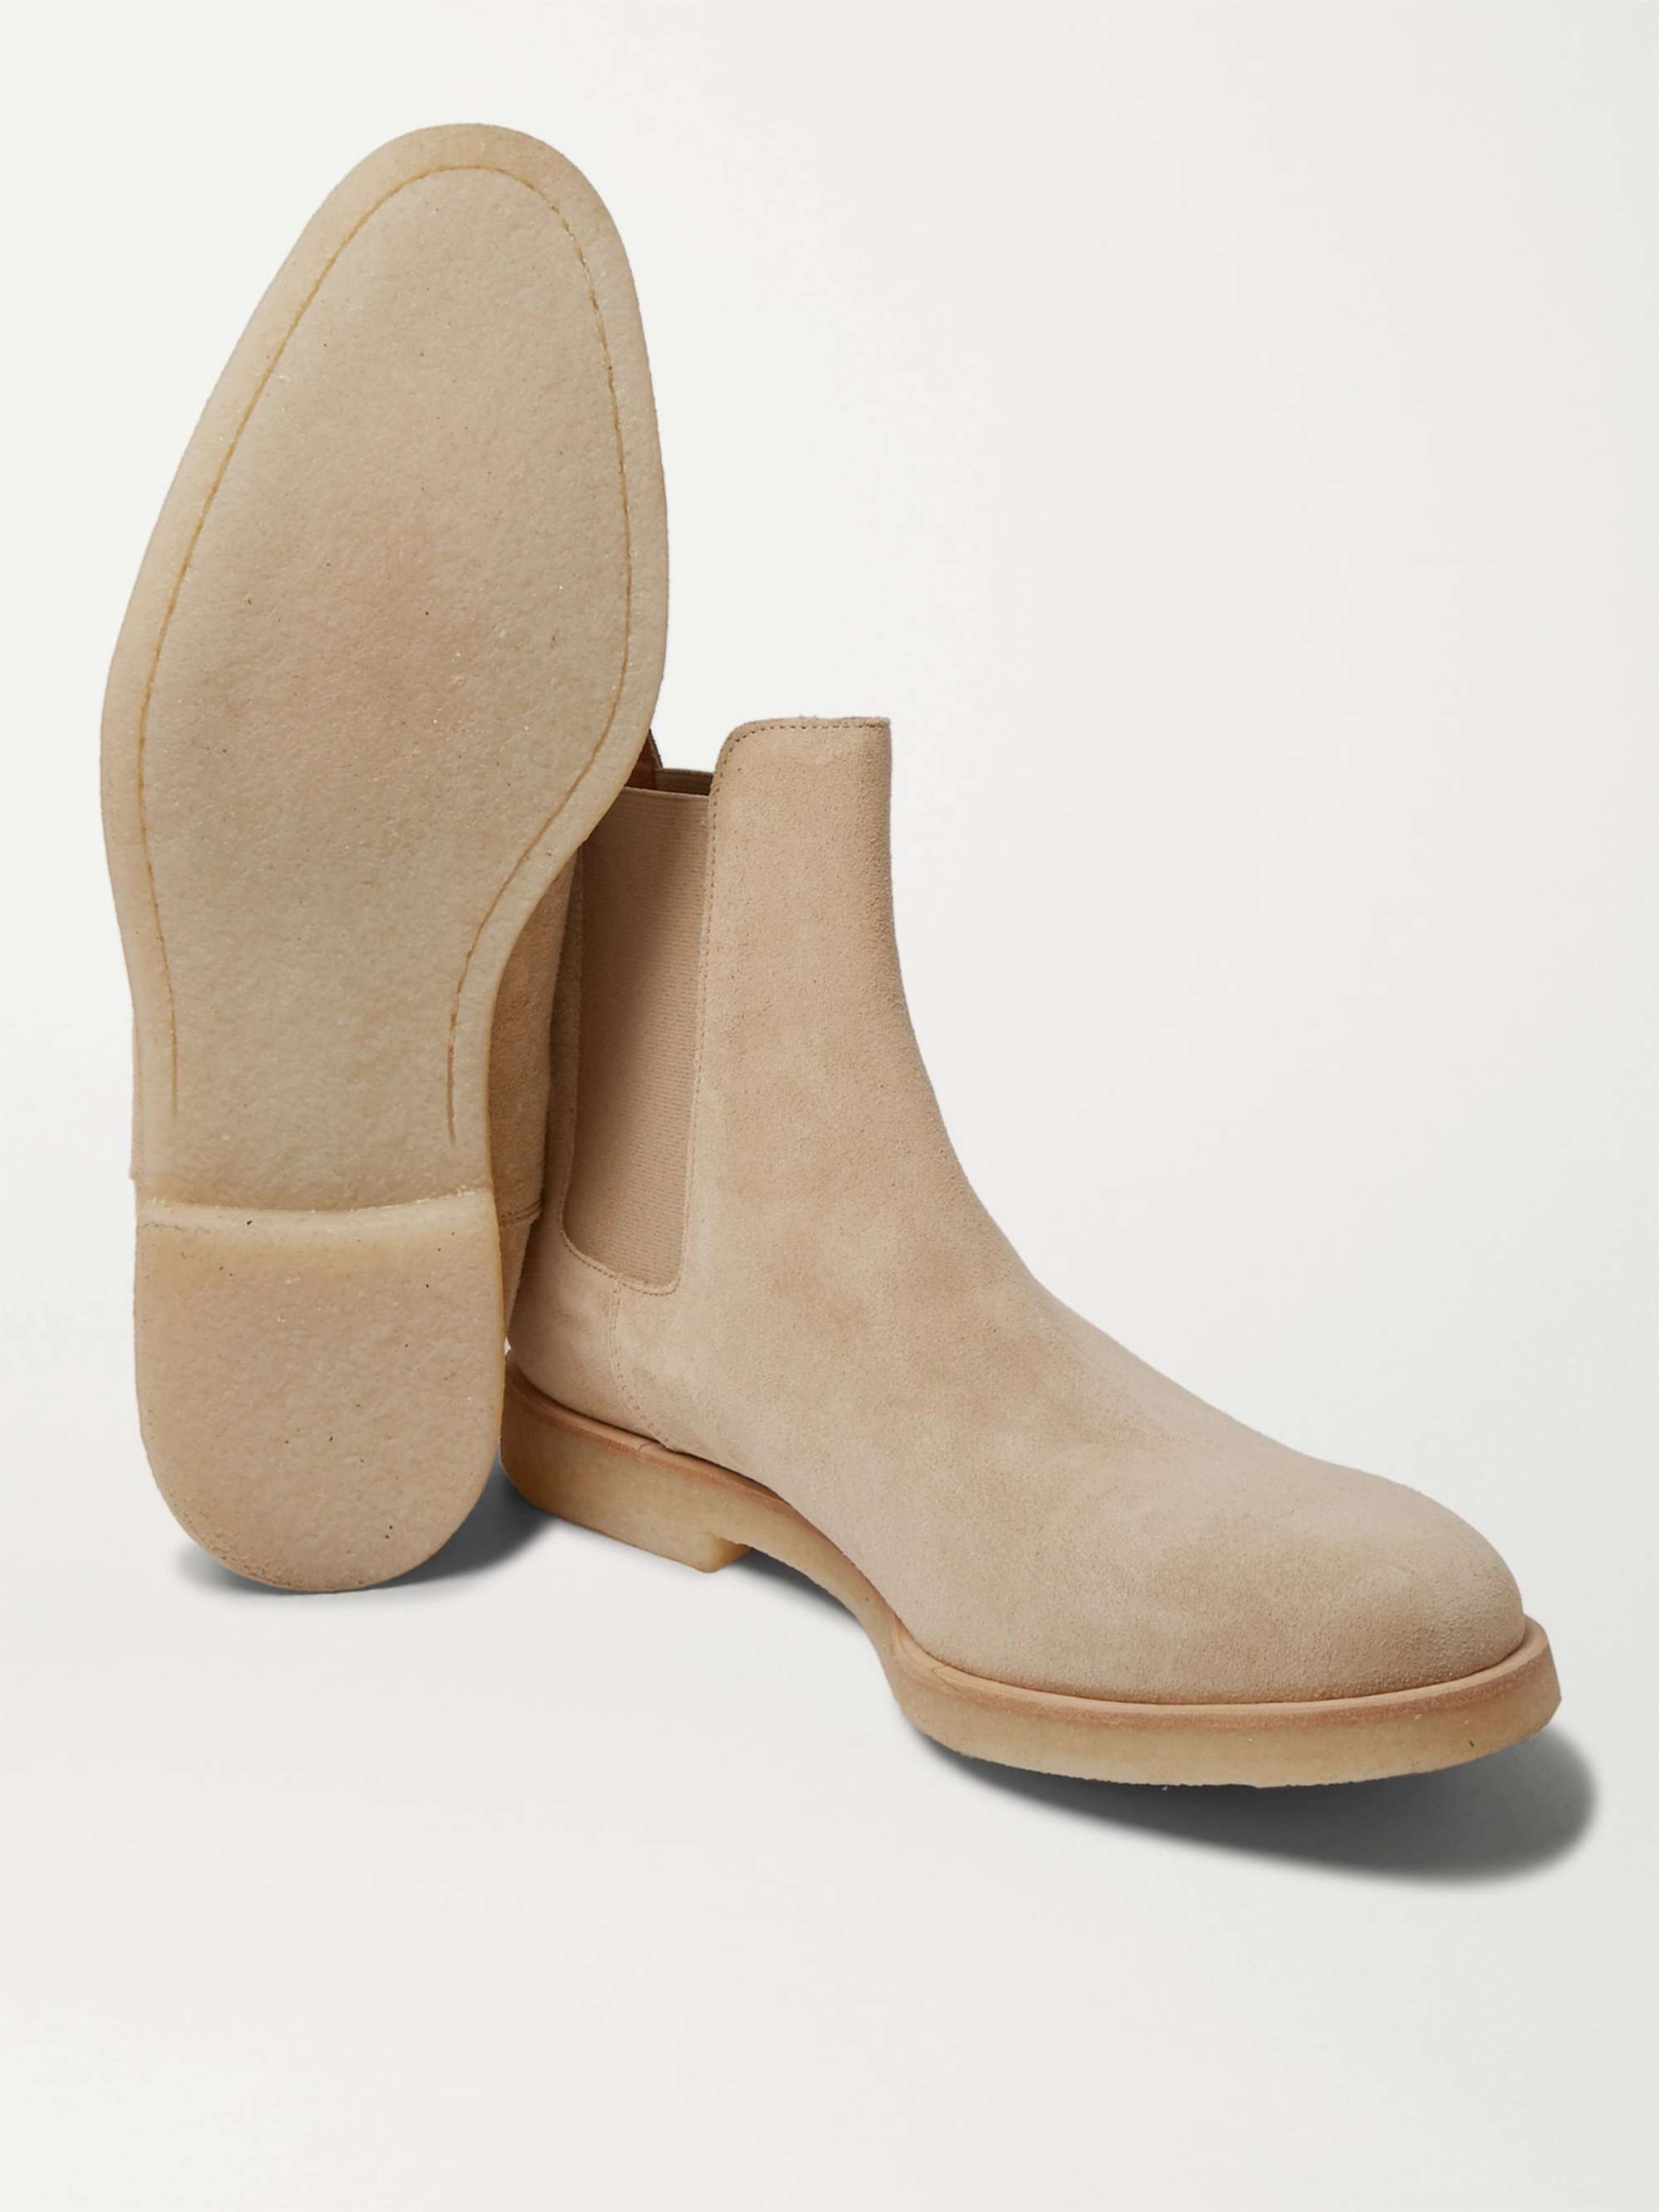 PROJECTS Suede Chelsea Boots for Men | MR PORTER